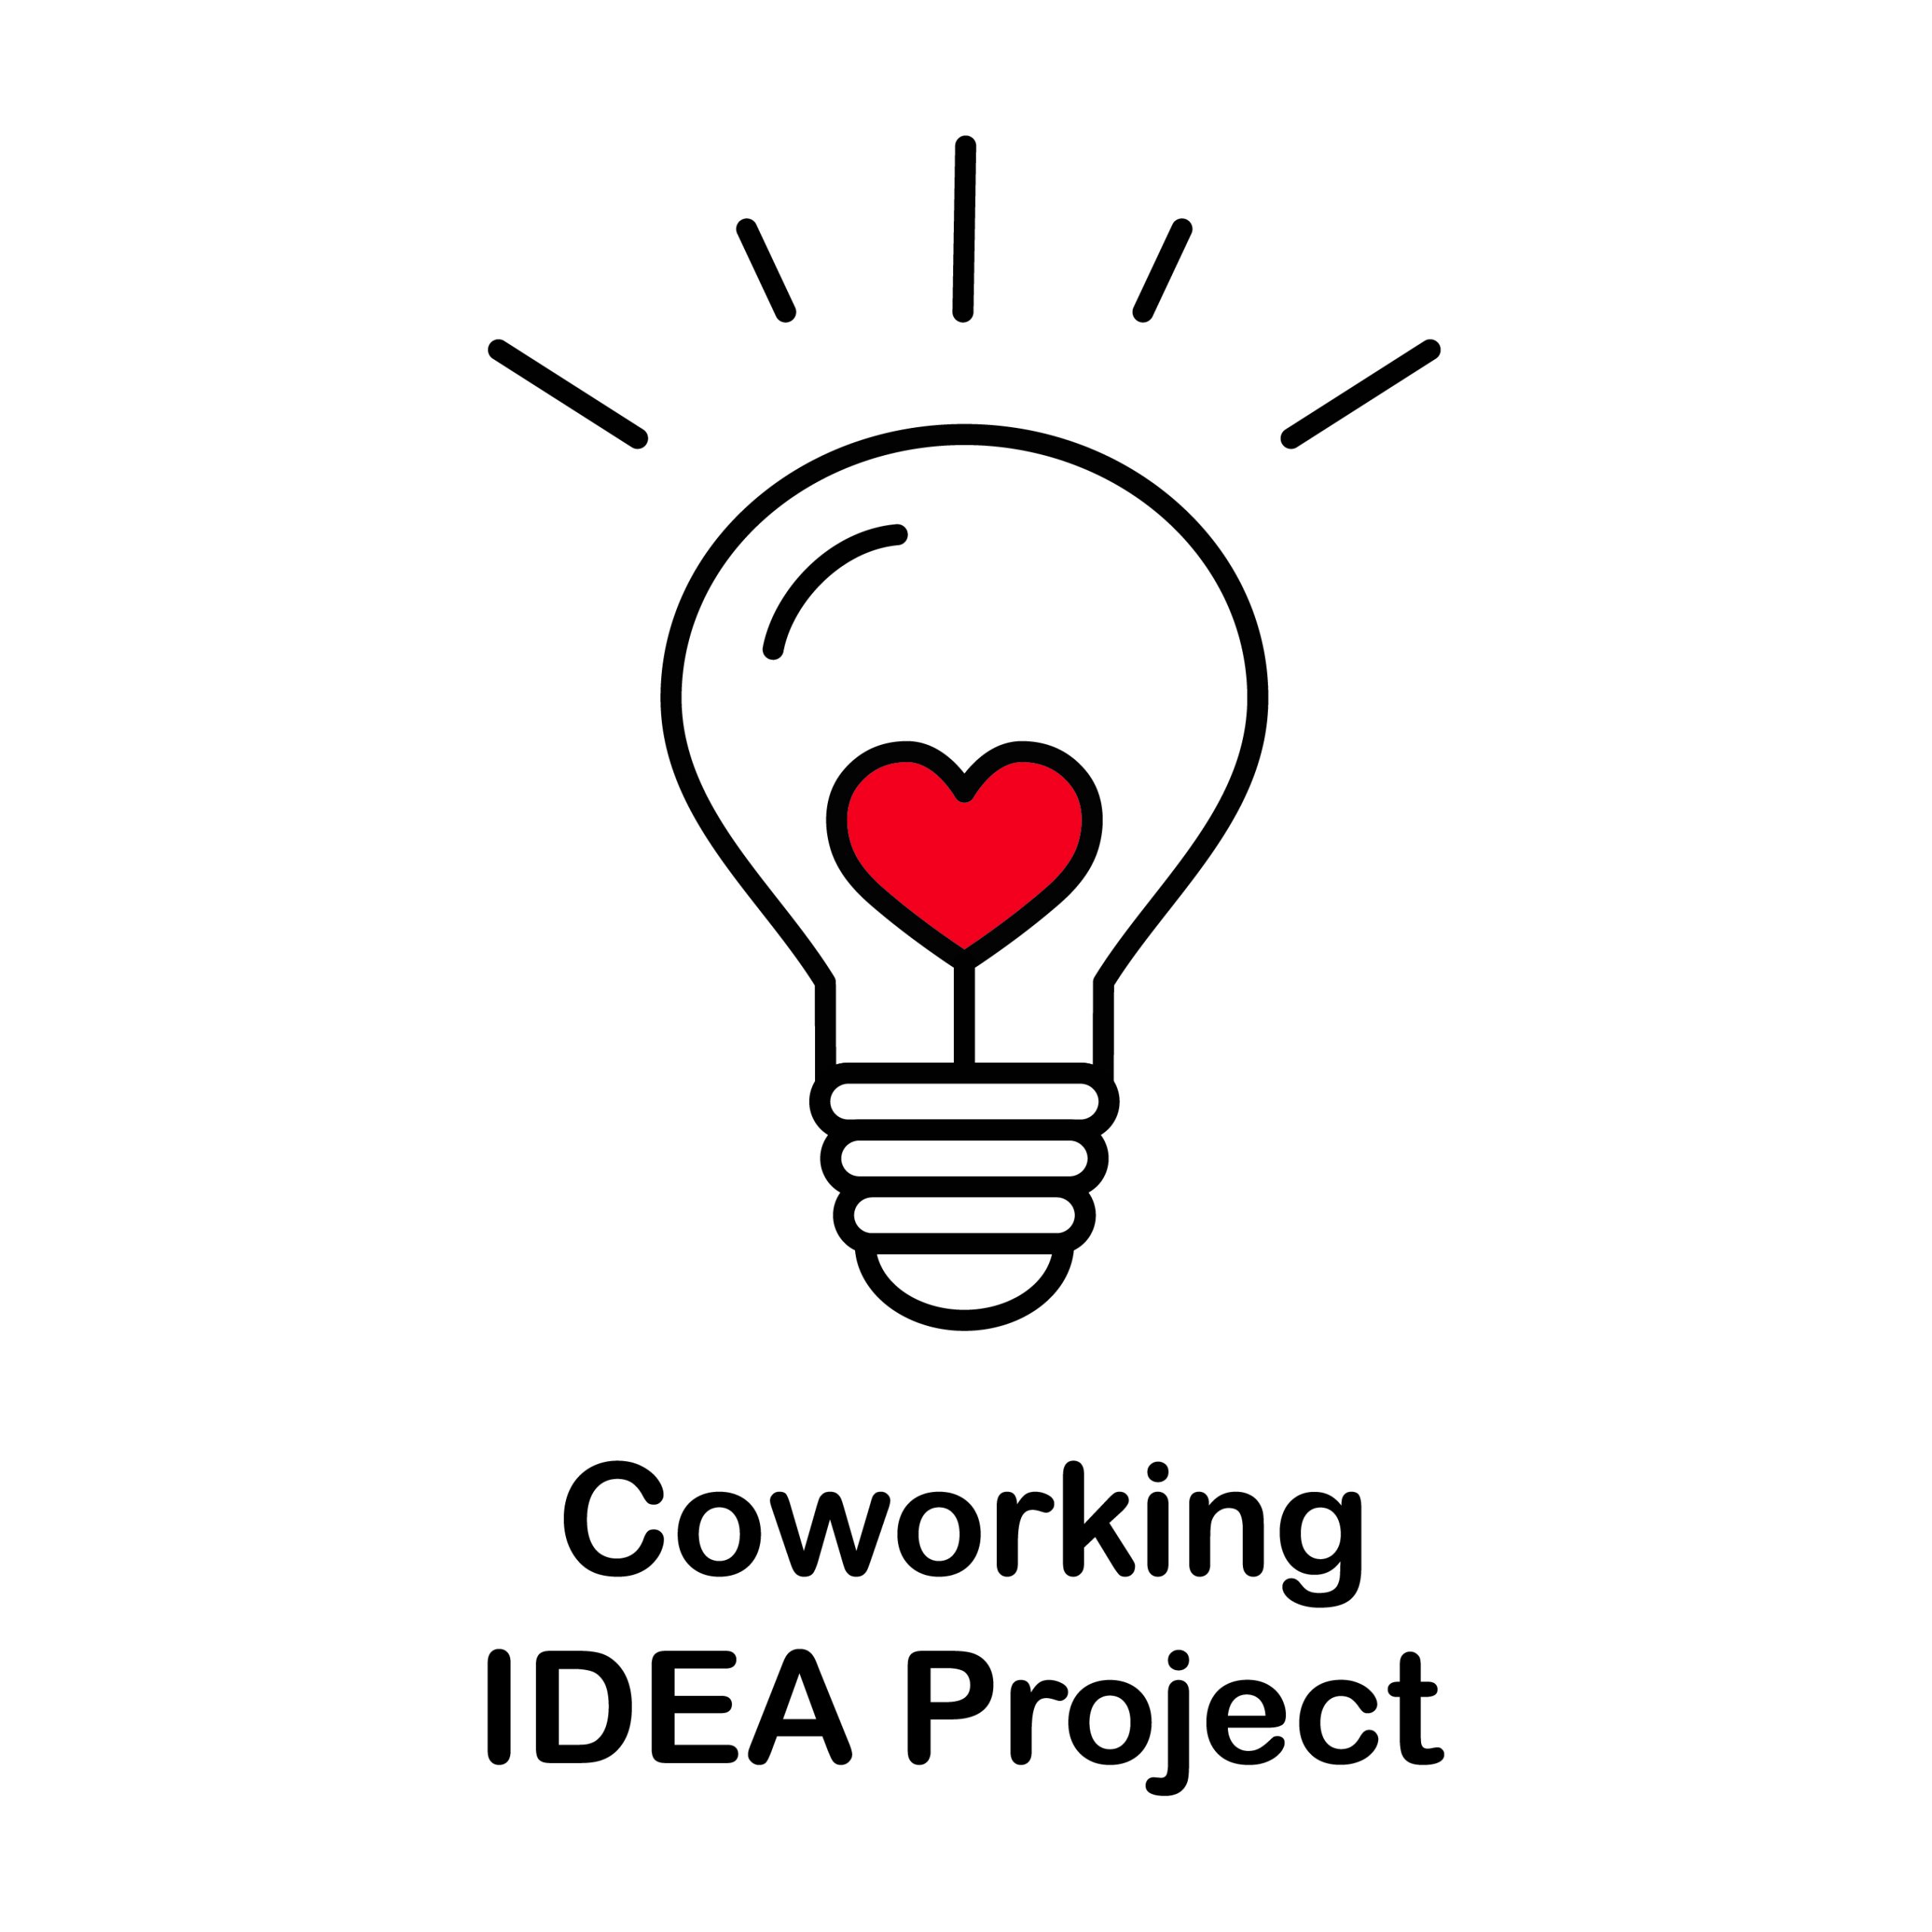 Coworking IDEA Project